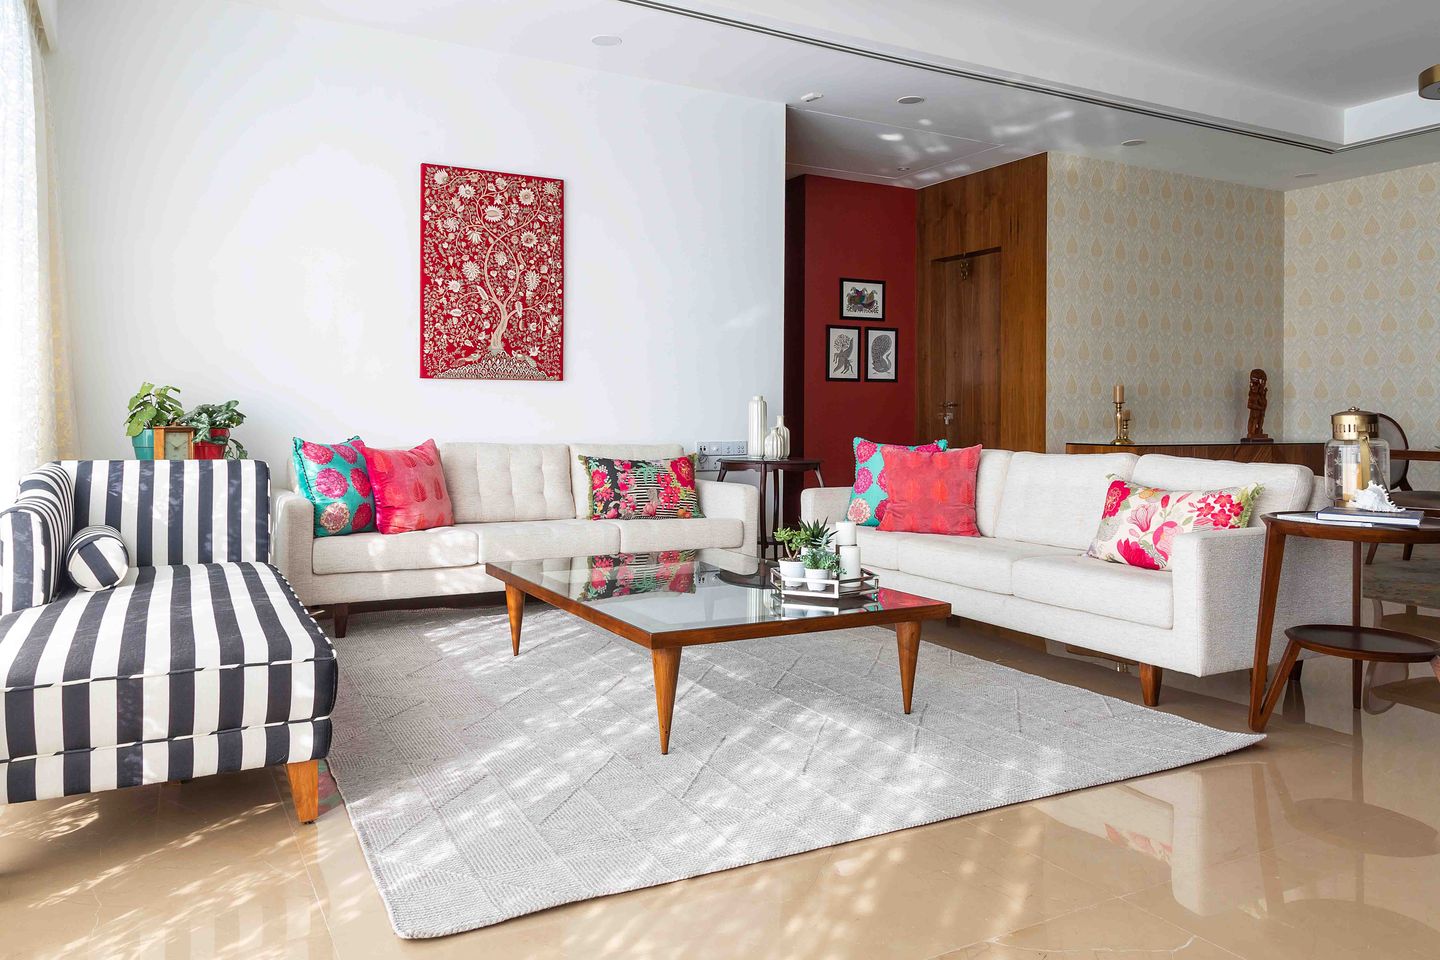 Bohemain 2-BHK Flat In Mumbai With Wooden TV Console